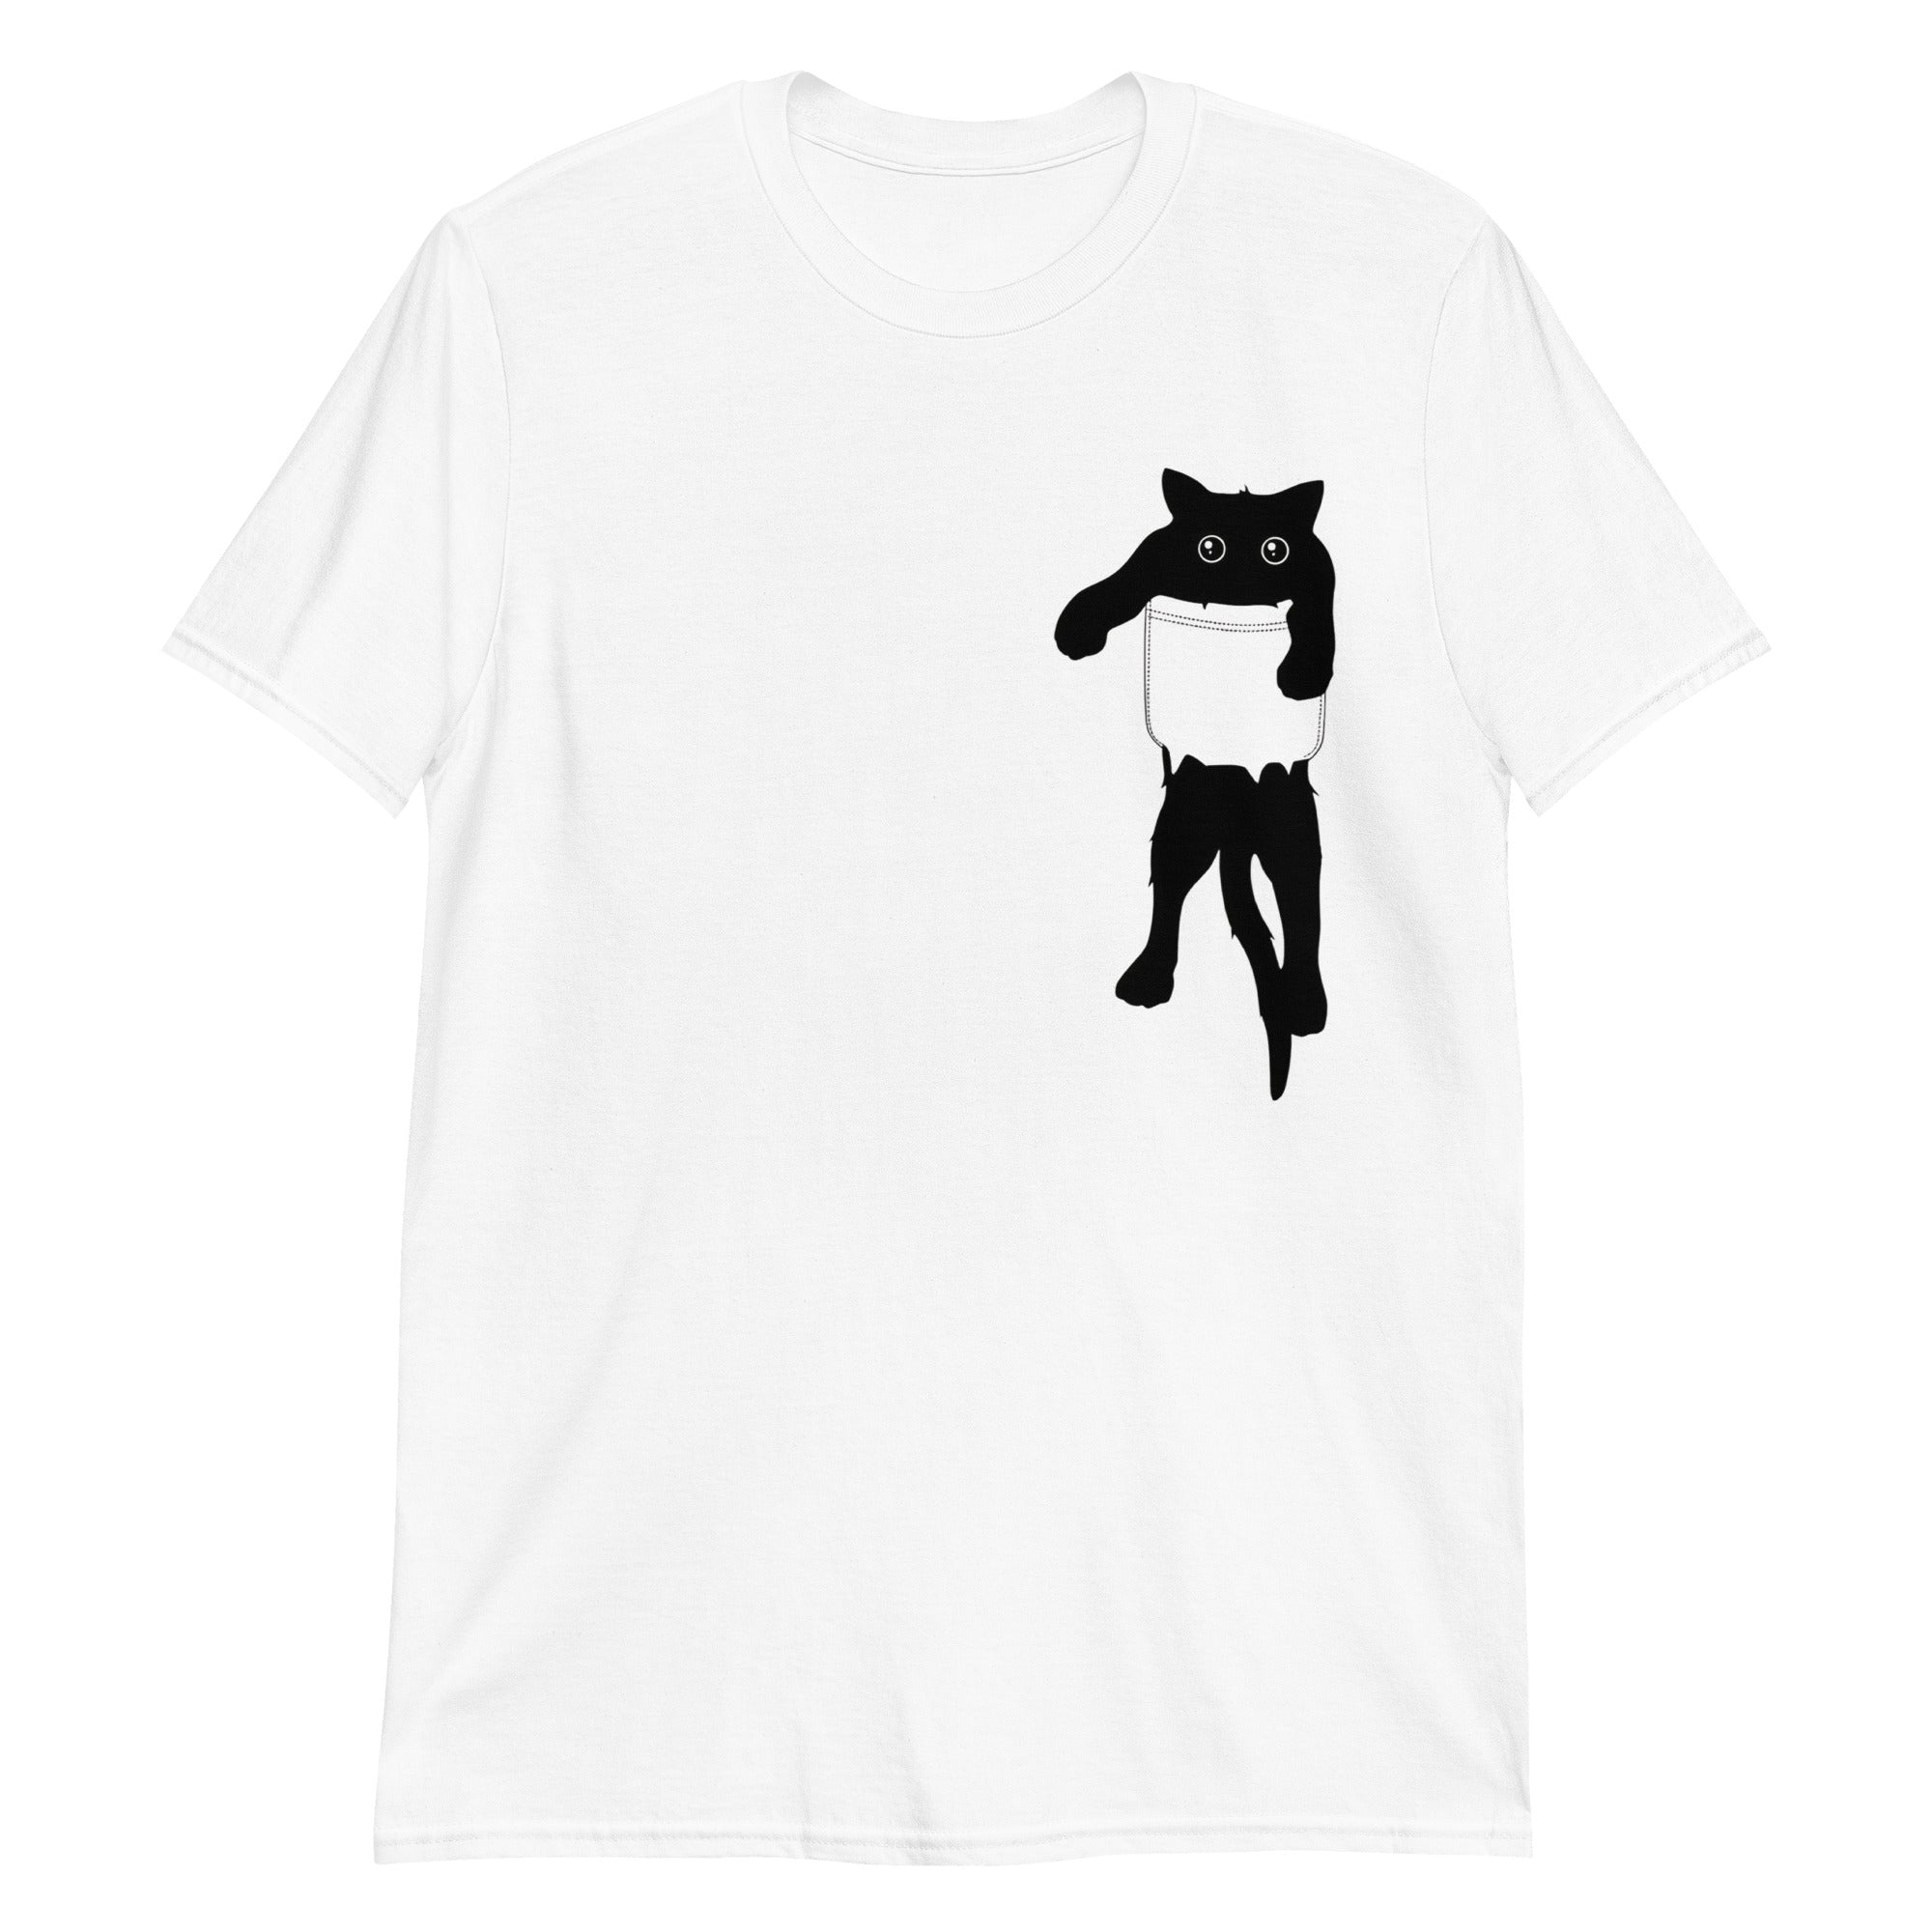 Cat In The Pocket T-shirt